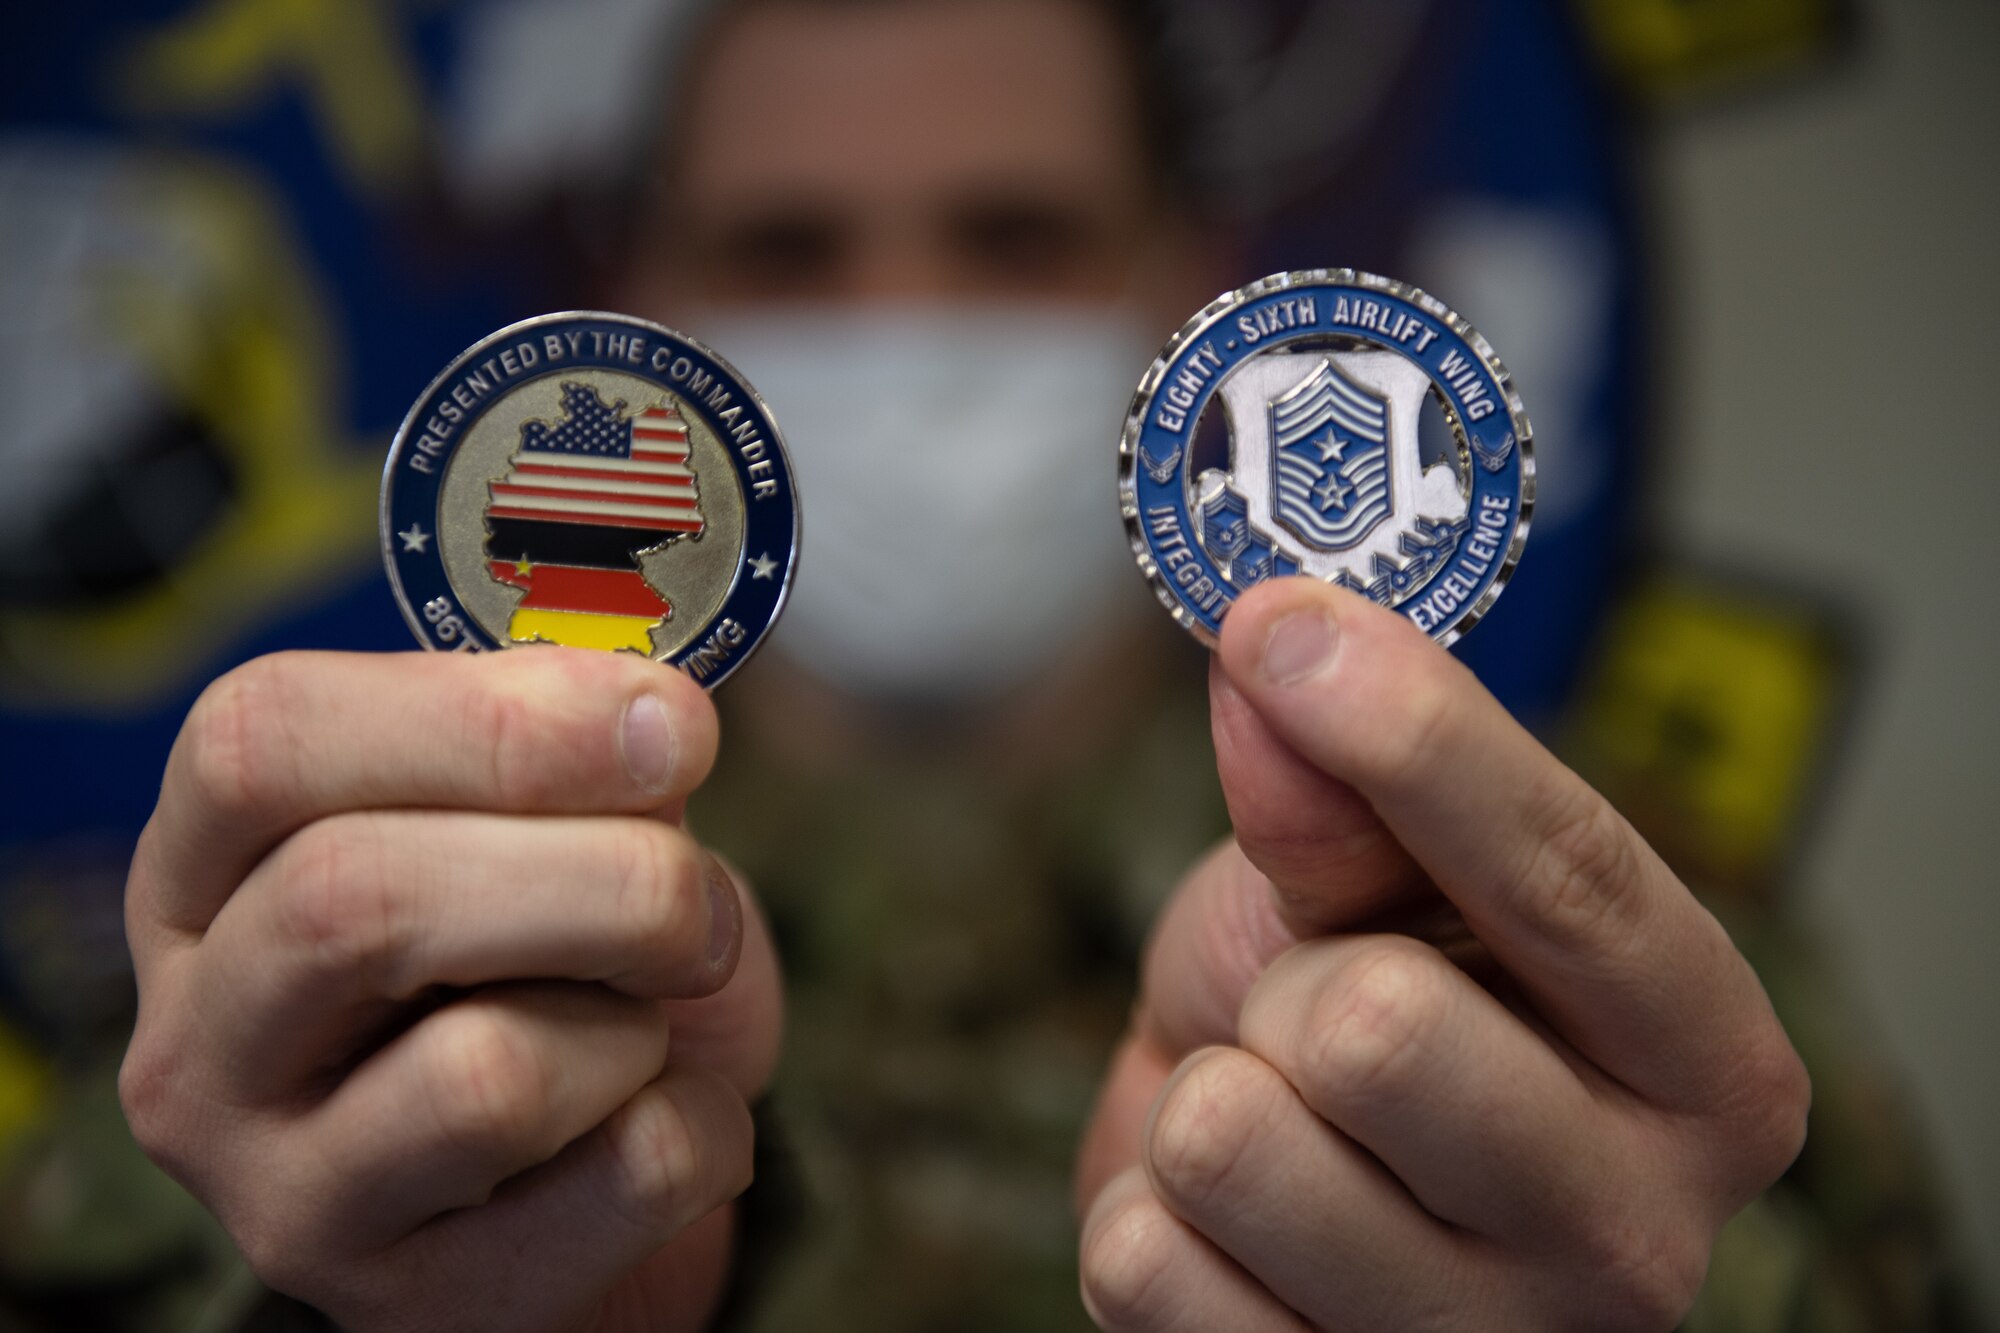 Man holds up two challenge coins.